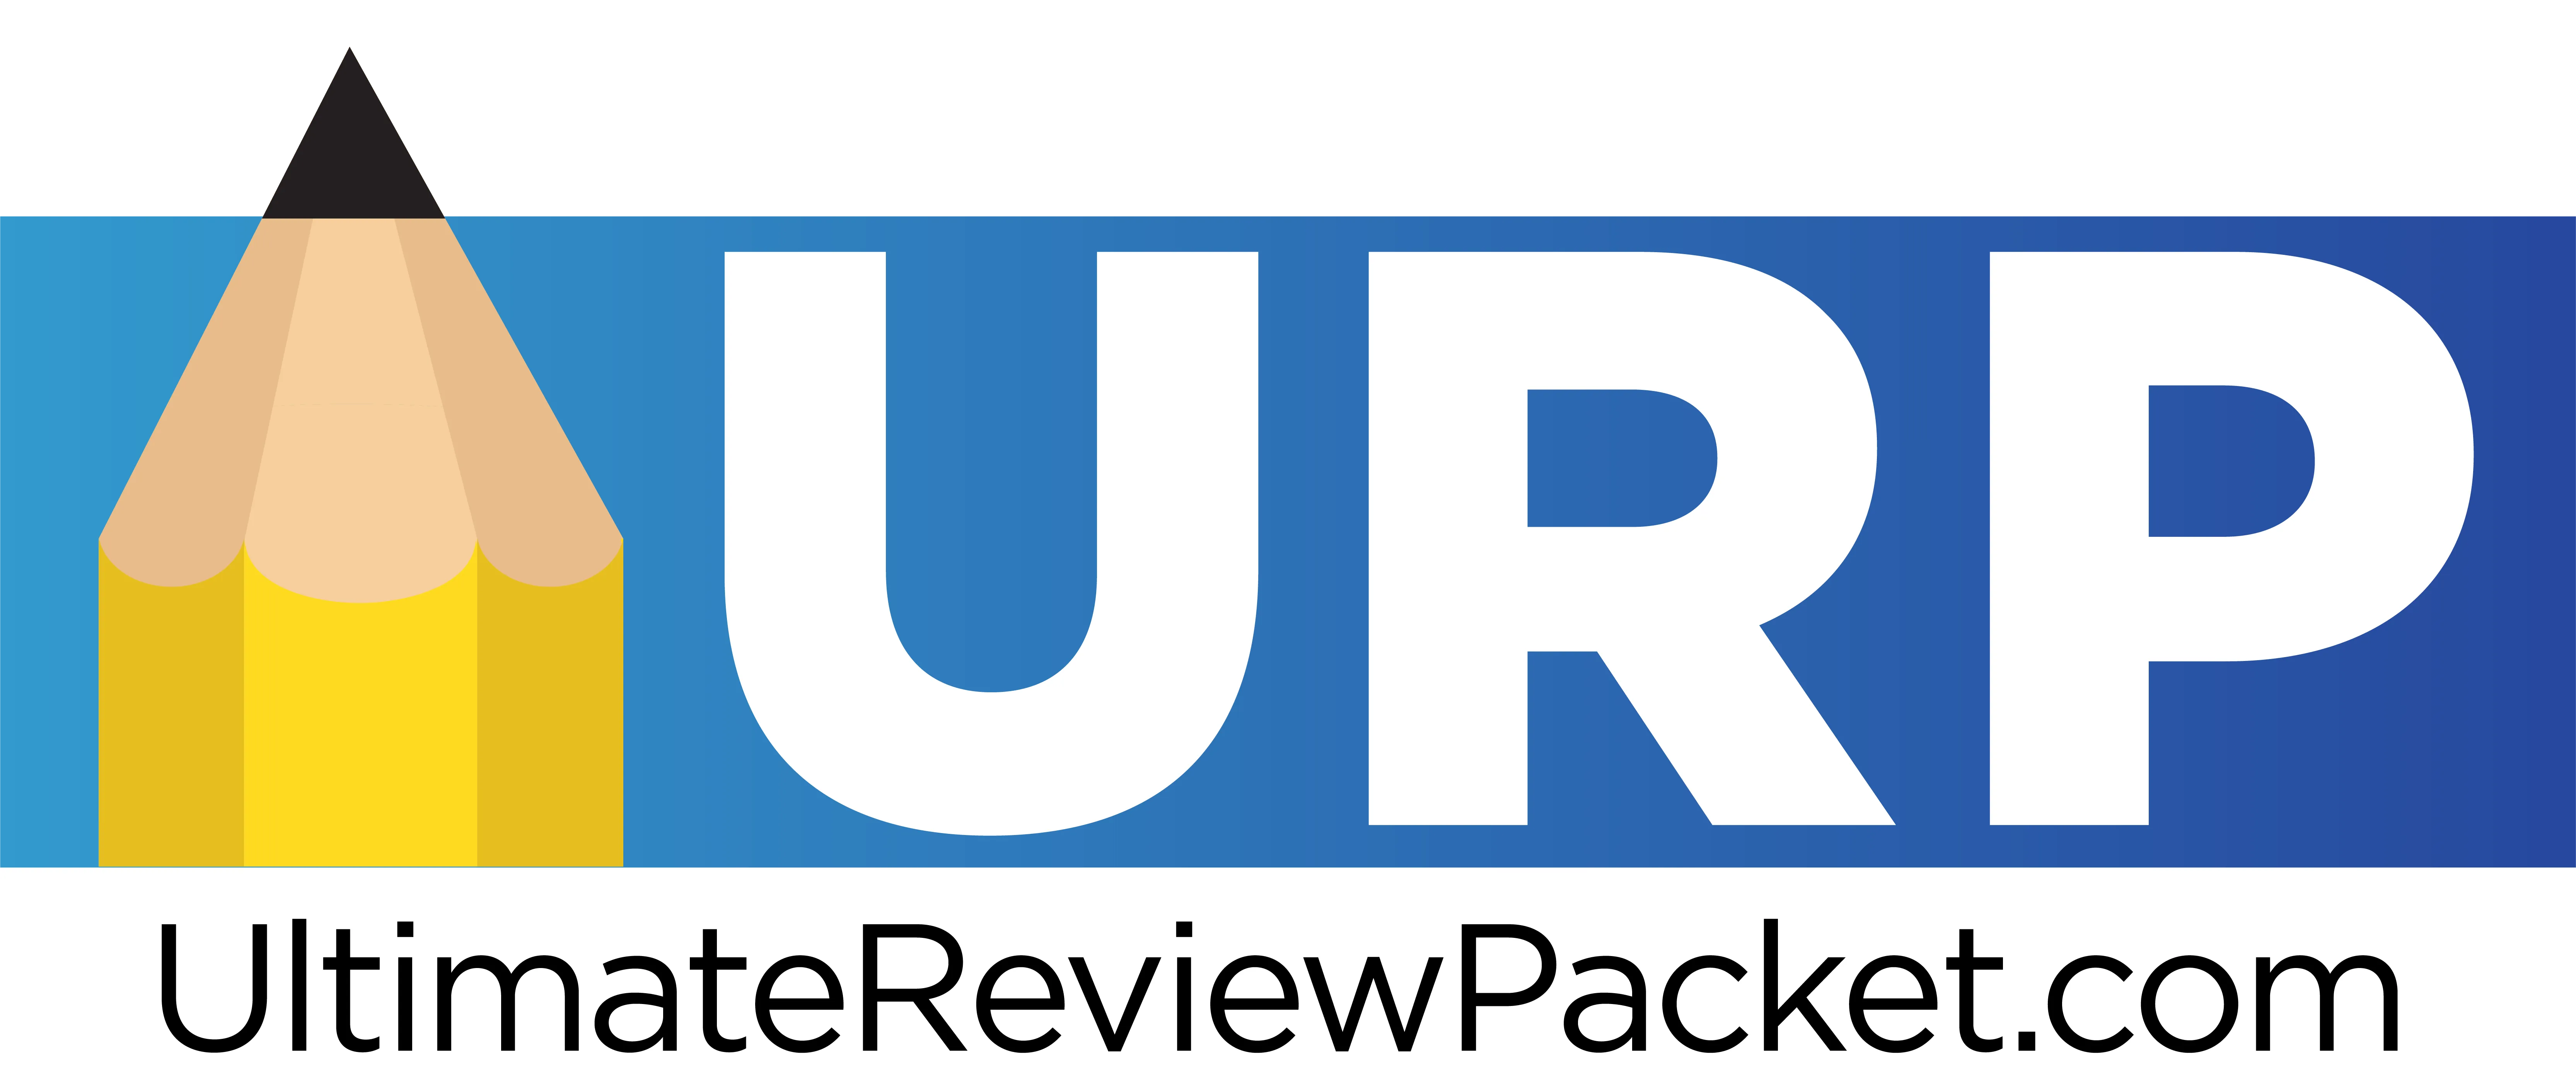 ultimatereviewpacket.com